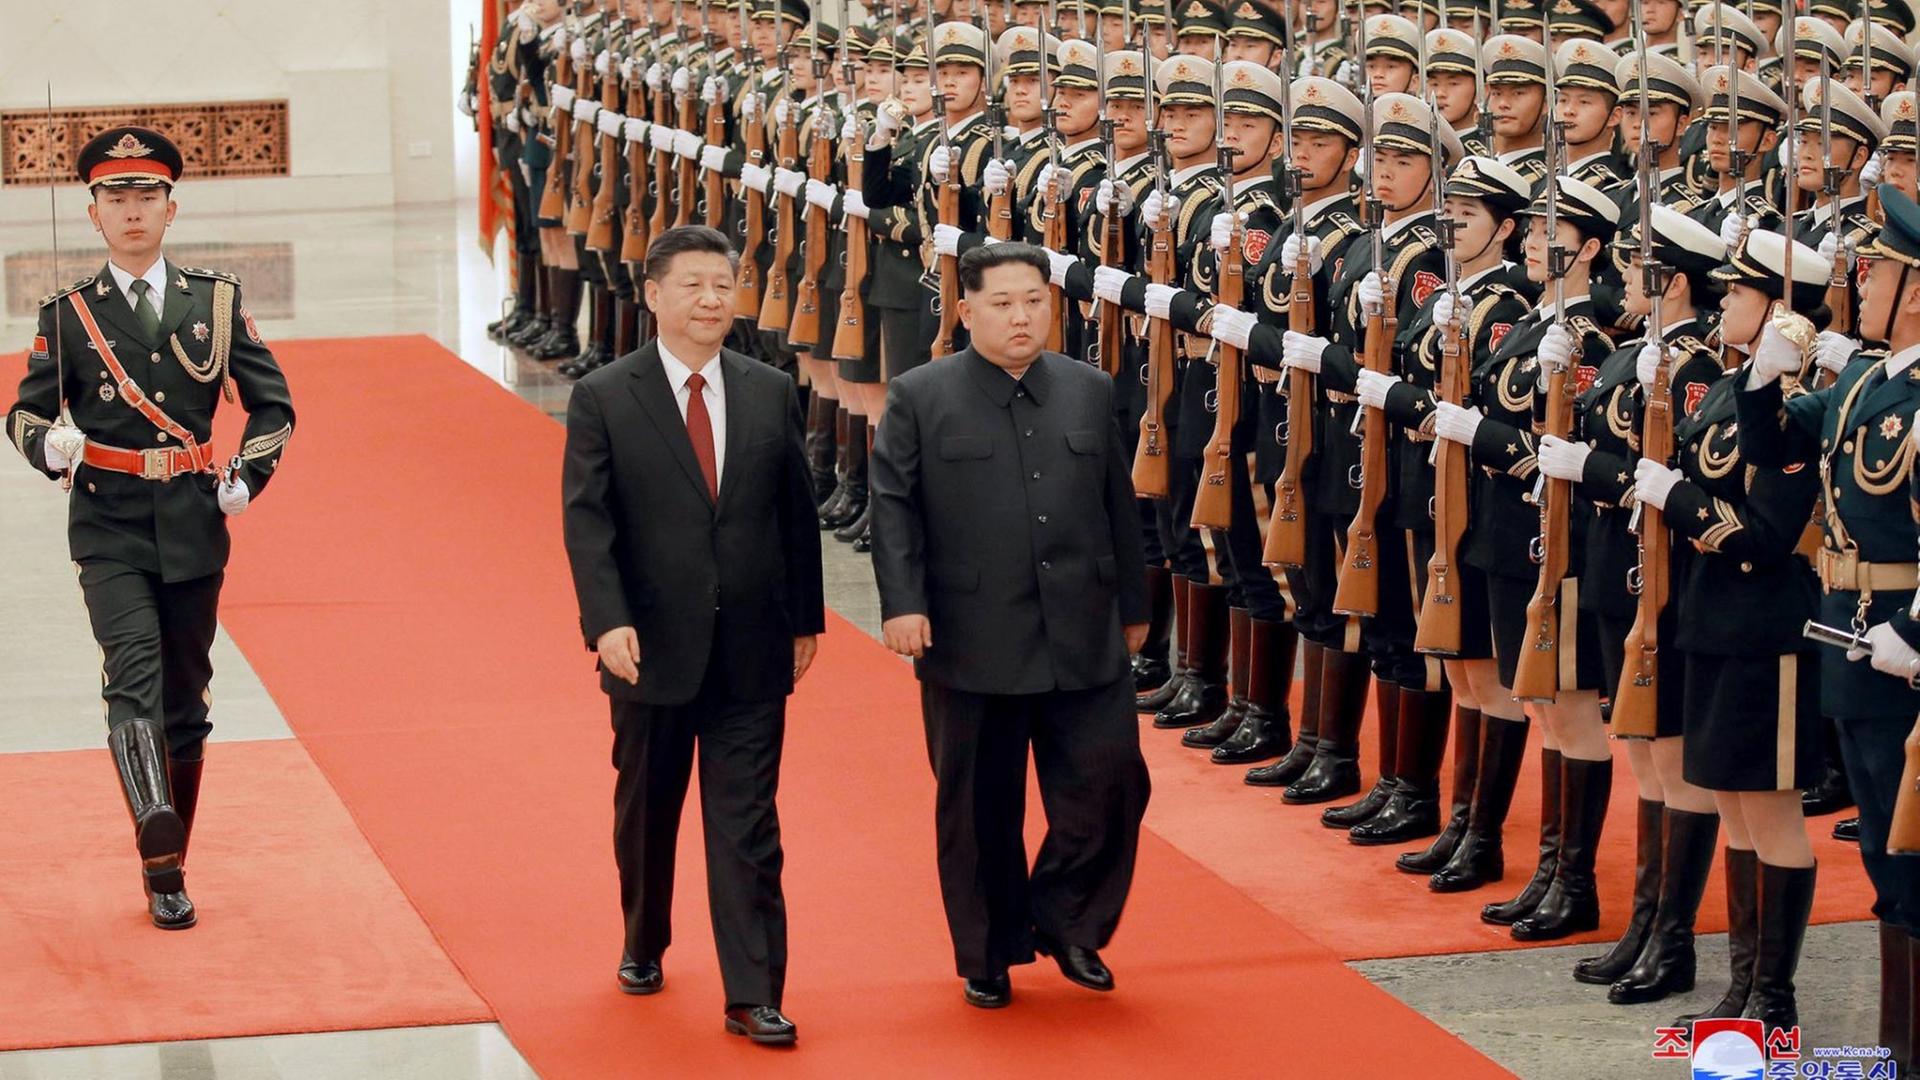 In this March 26, 2018, photo, North Korean leader Kim Jong Un, center right, and Chinese counterpart Xi Jinping, center left, inspect the honor guard at the Great Hall of the People in Beijing. North Korea's leader Kim and his Chinese counterpart Xi sought to portray strong ties between the long-time allies despite a recent chill as both countries on Wednesday, March 28, 2018, confirmed Kim's secret trip to Beijing this week. The content of this image is as provided and cannot be independently verified. Korean language watermark on image as provided by source reads: "KCNA" which is the abbreviation for Korean Central News Agency. (Korean Central News Agency/Korea News Service via AP)